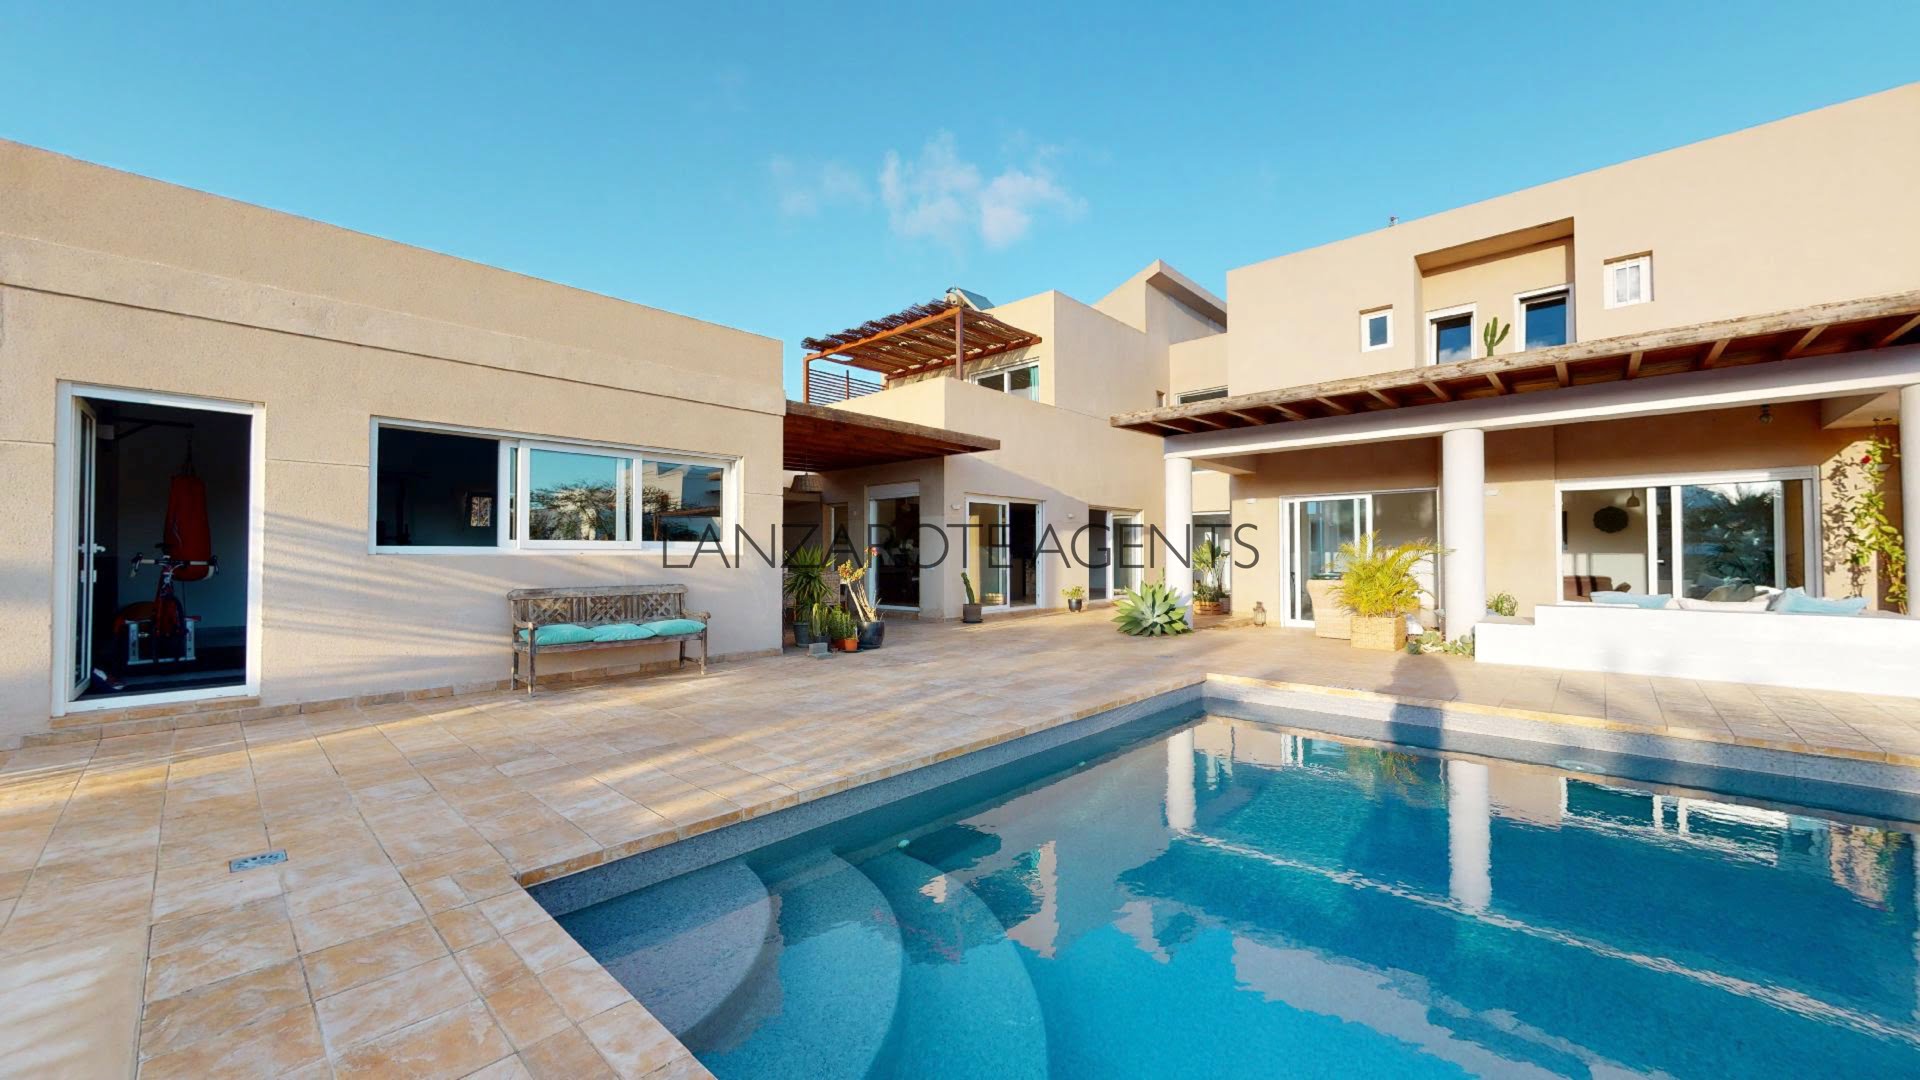 Stunning Modern Detached Luxury Villa in Costa Teguise with Huge Plot of Land, Garage, Private Pool, Private Tennis Court and a Self Contained Apartment.